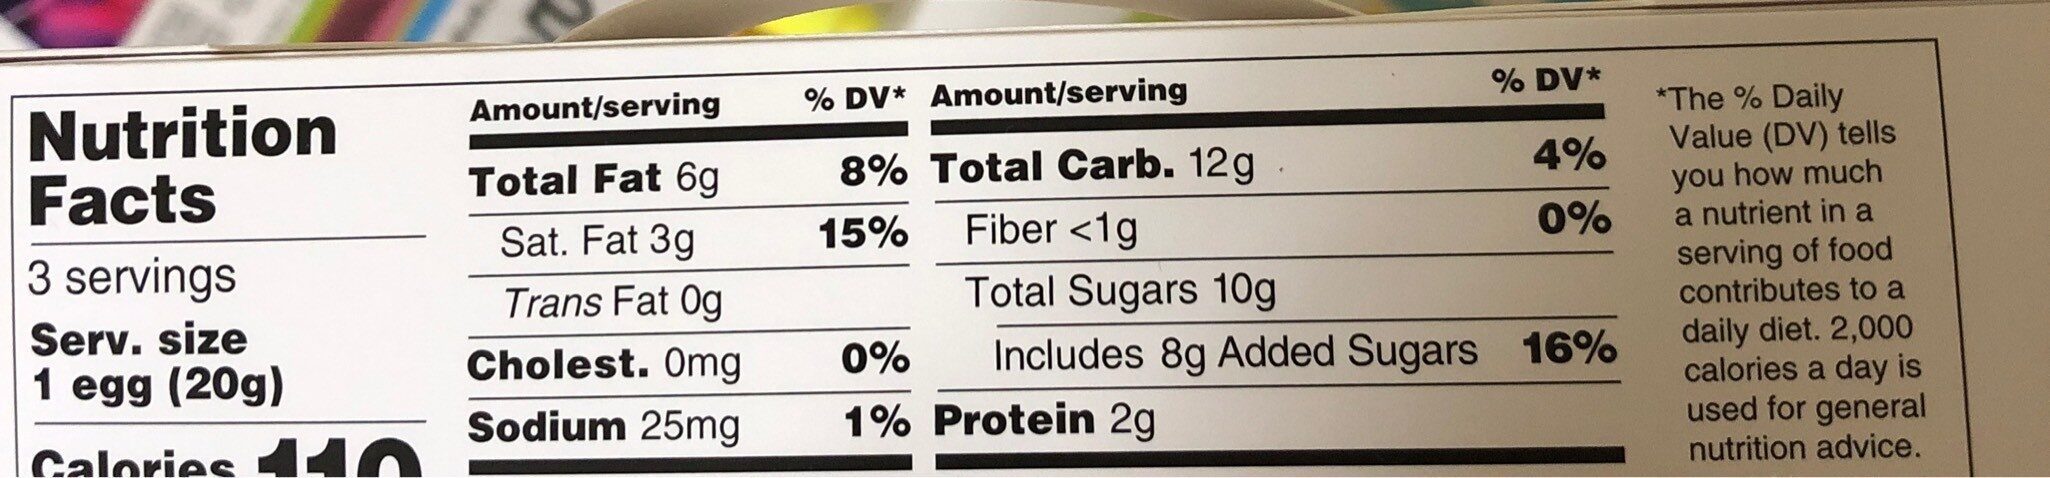 Joy candy - Nutrition facts